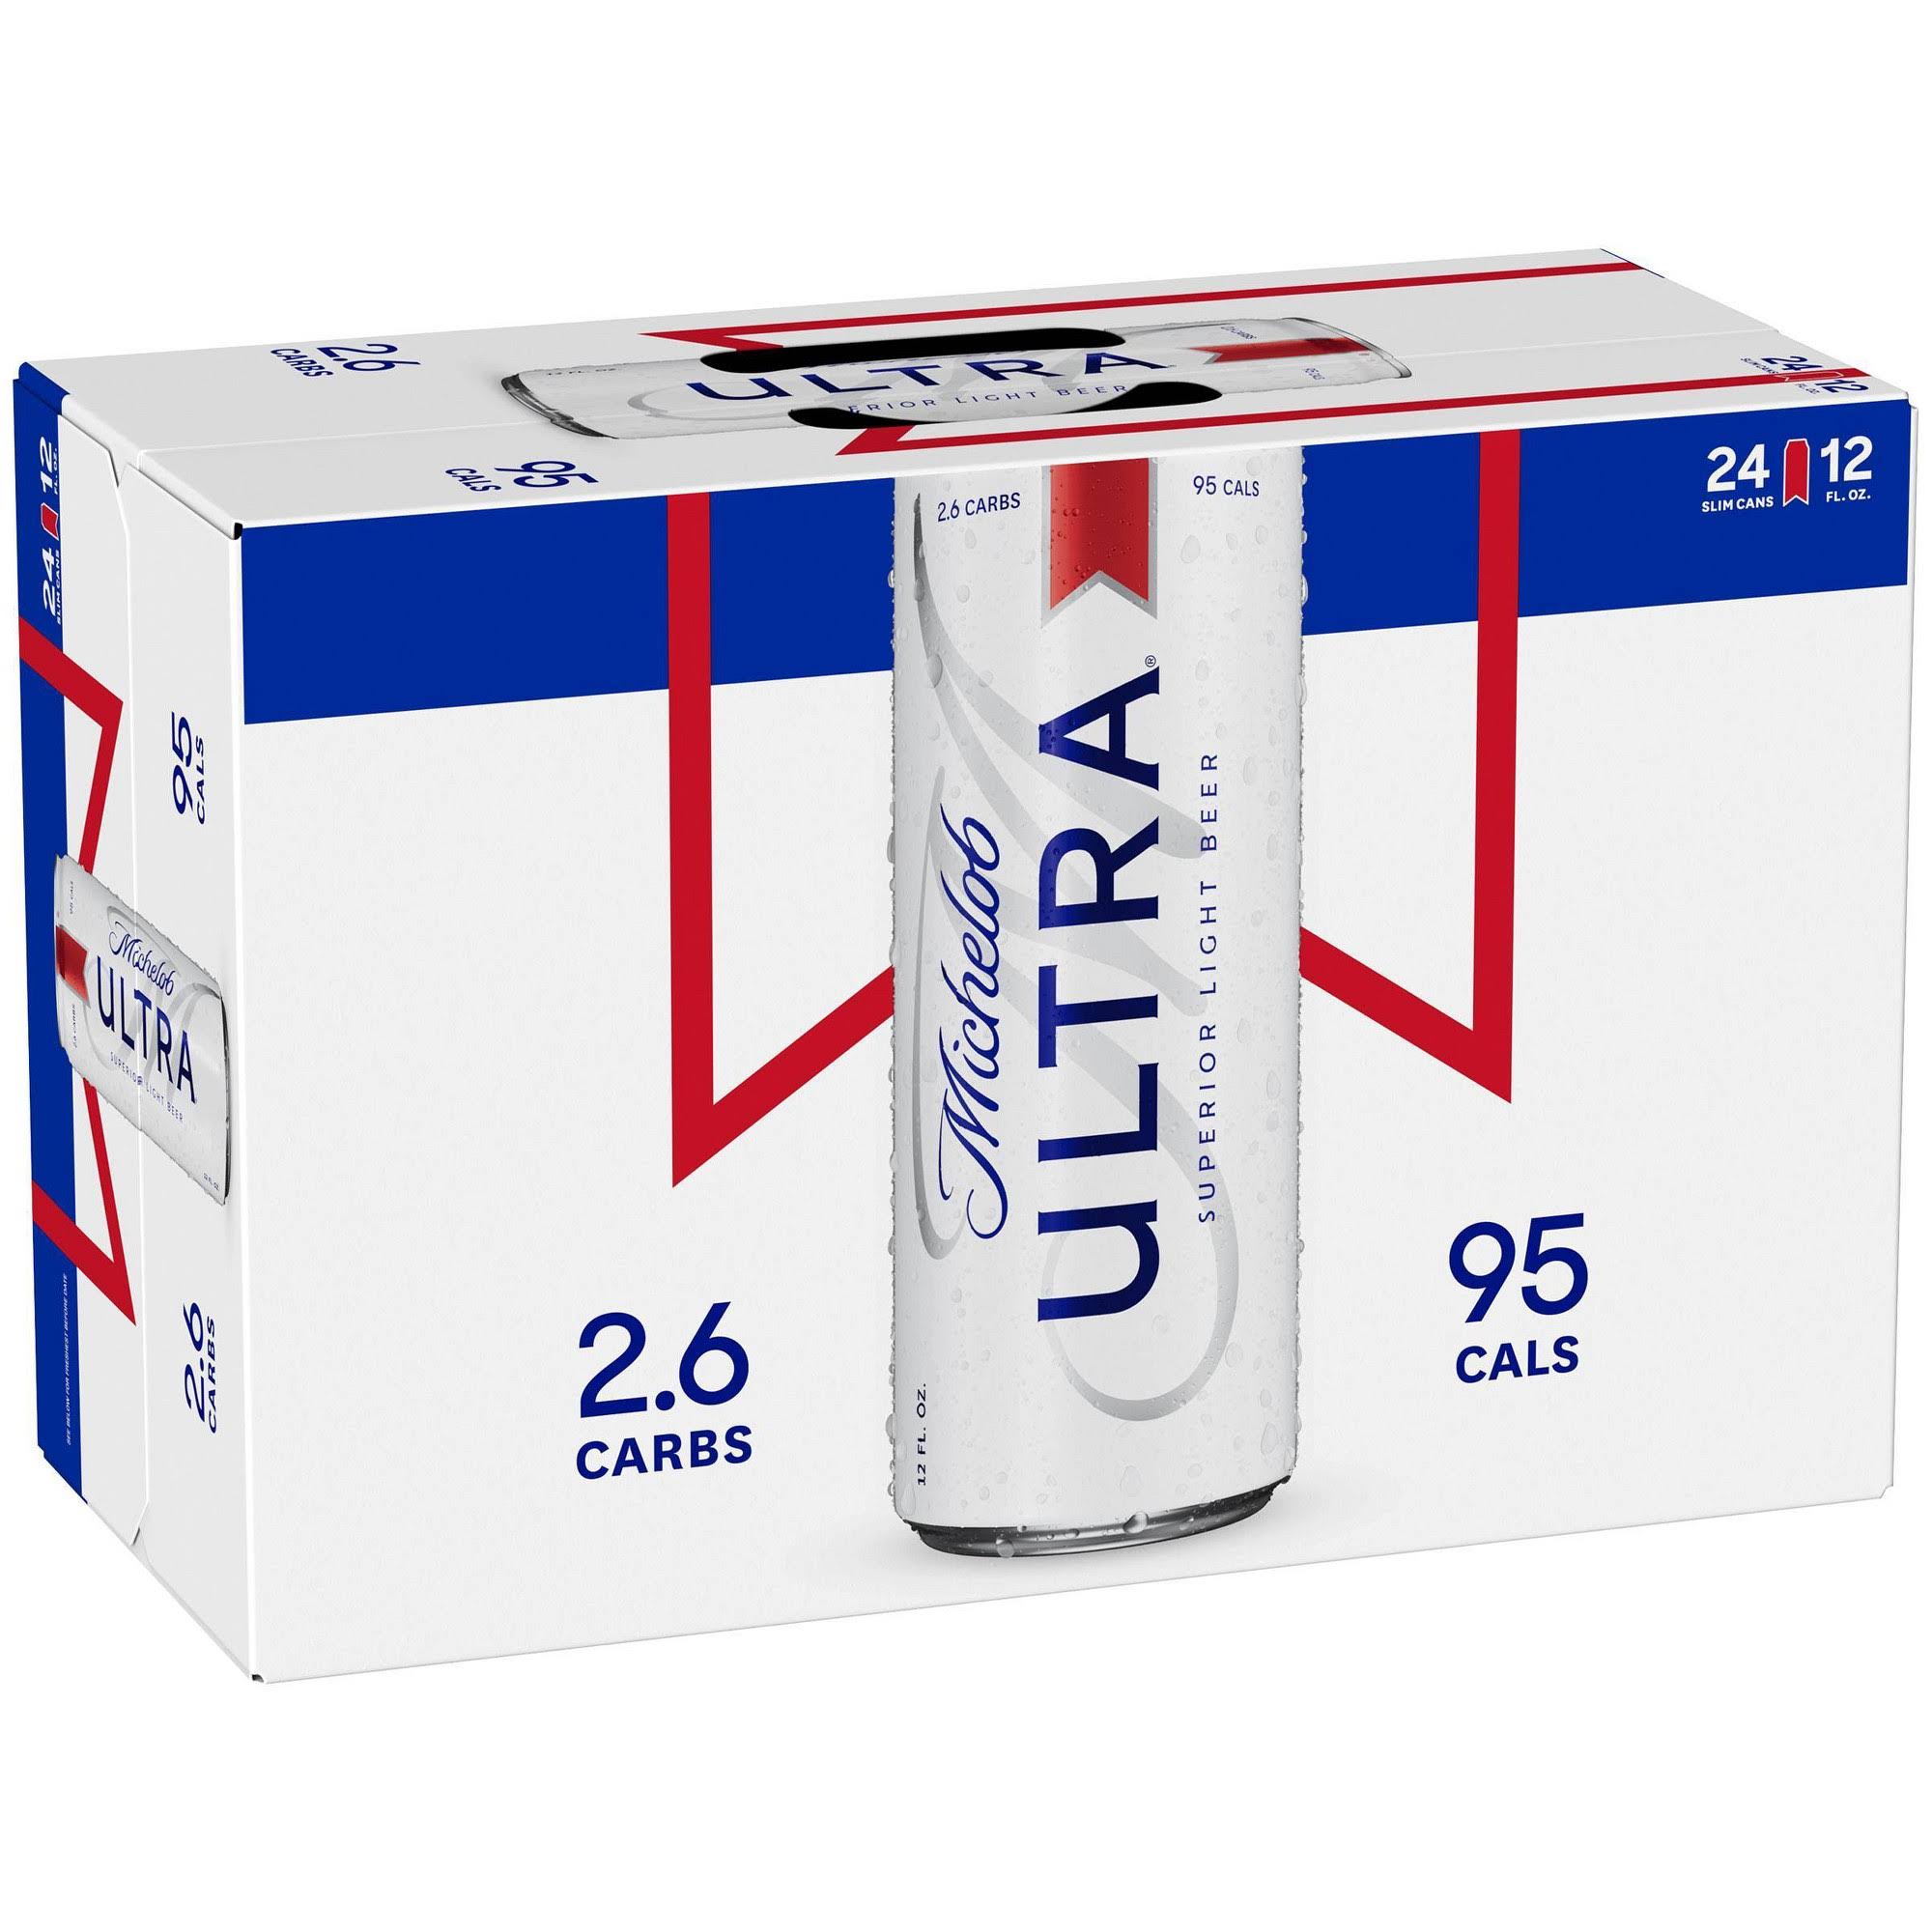 Michelob Ultra Beer - 24 Cans